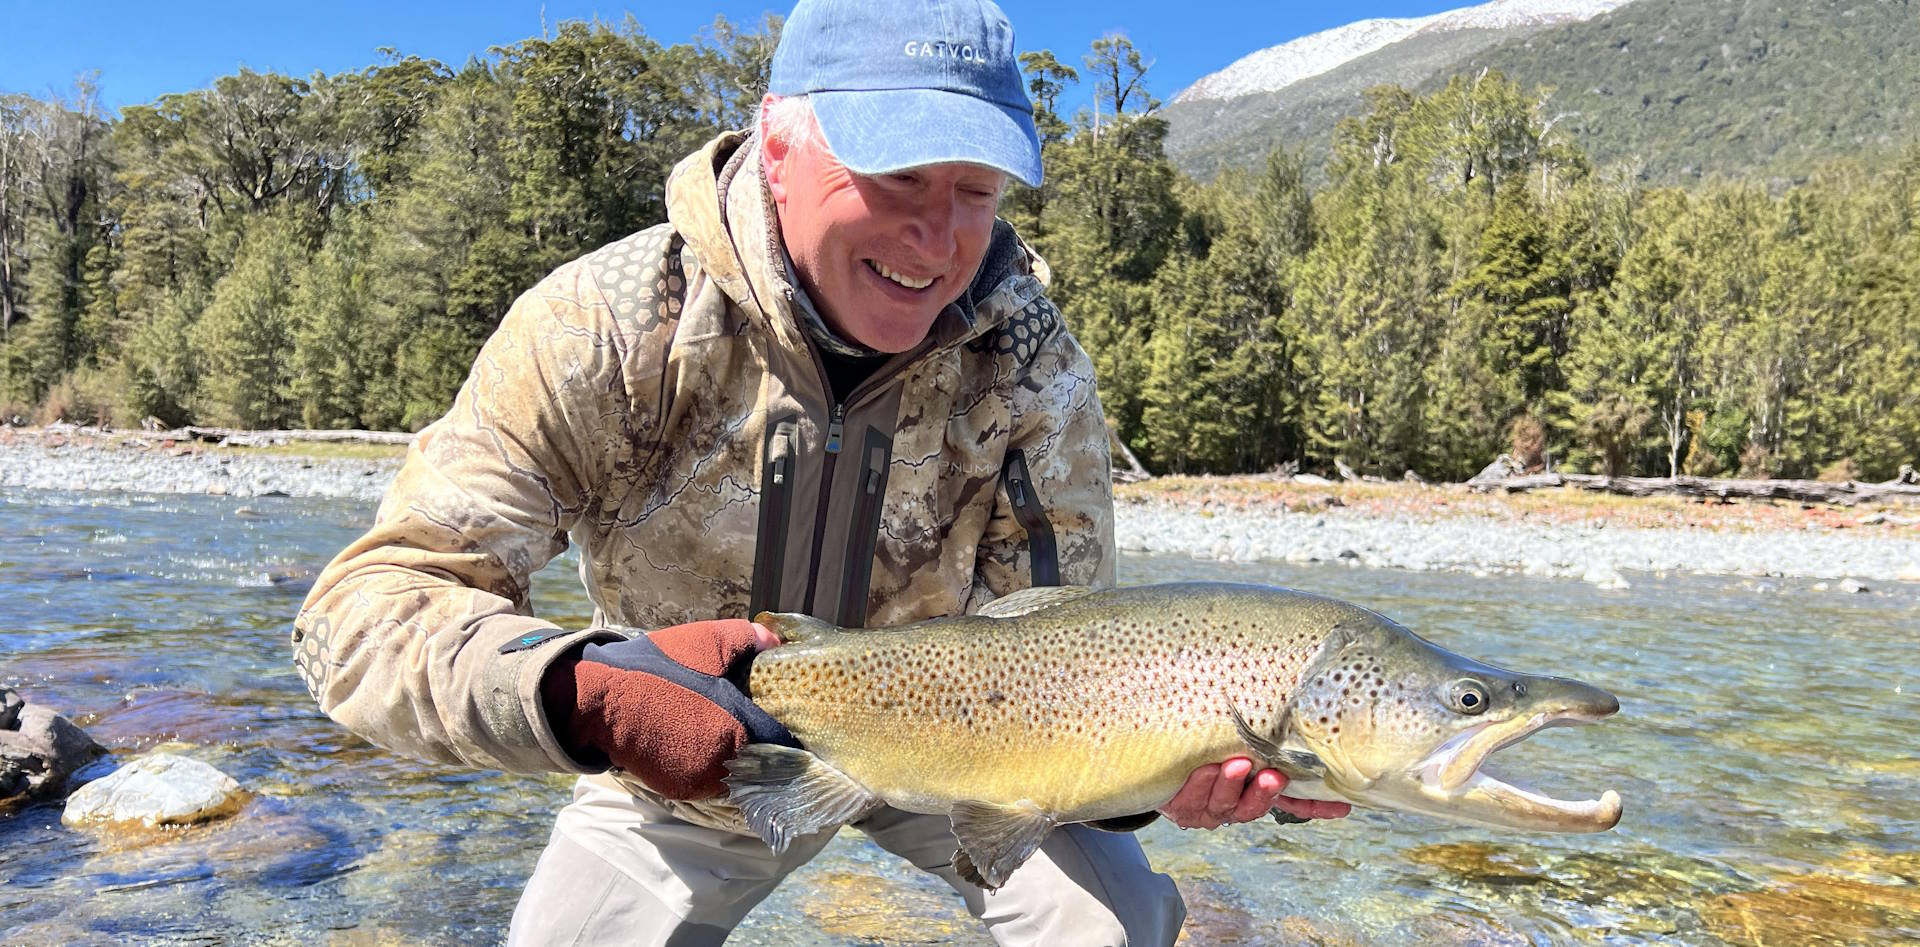 Full Day Guided Fly Fishing